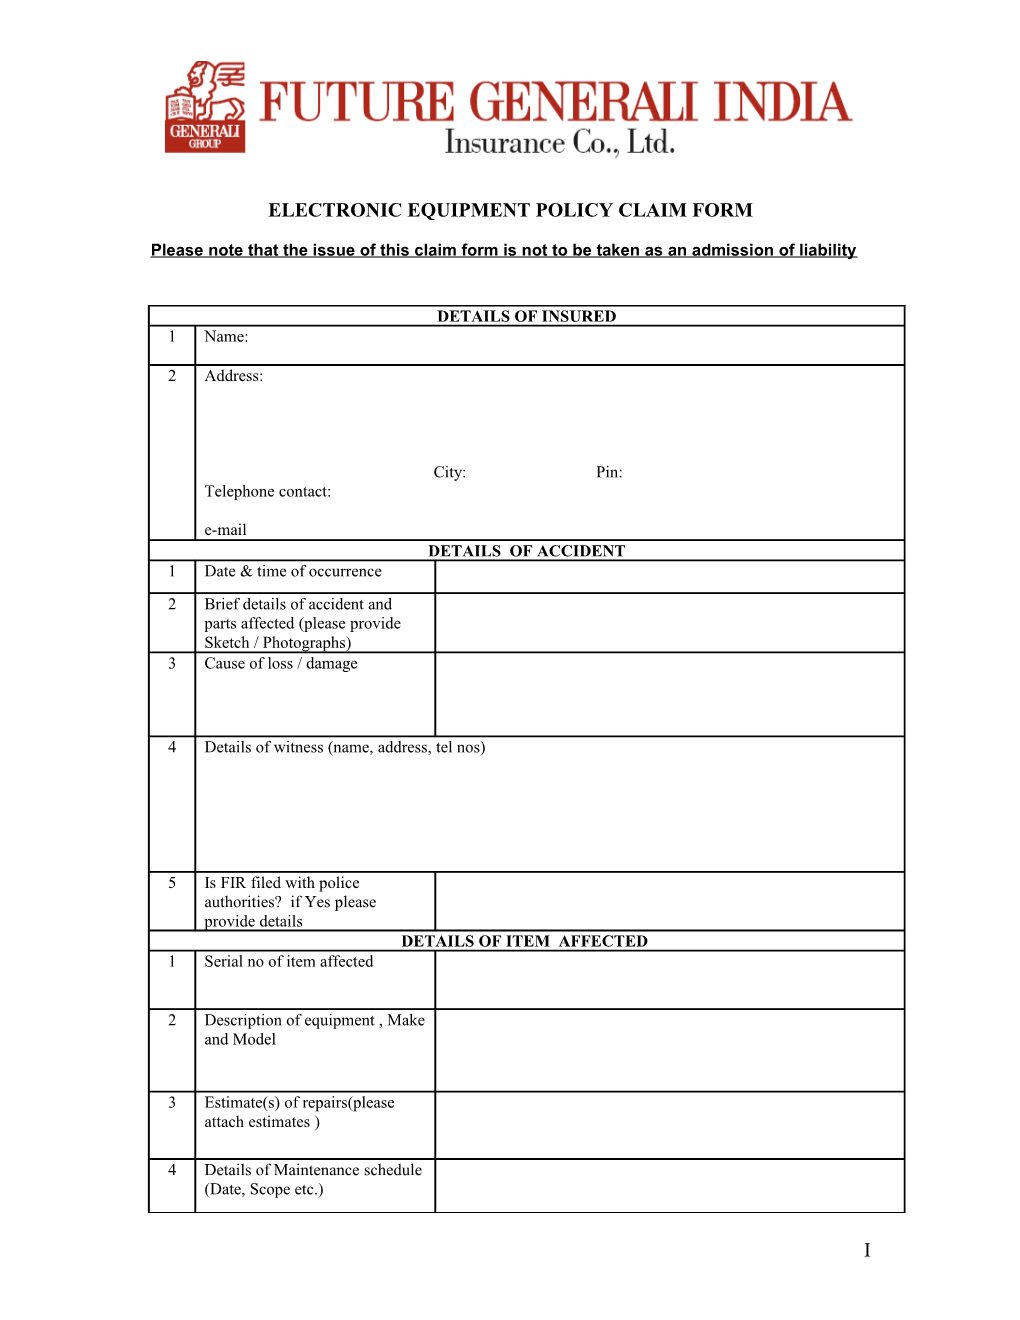 Electronic Equipment Policy Claim Form